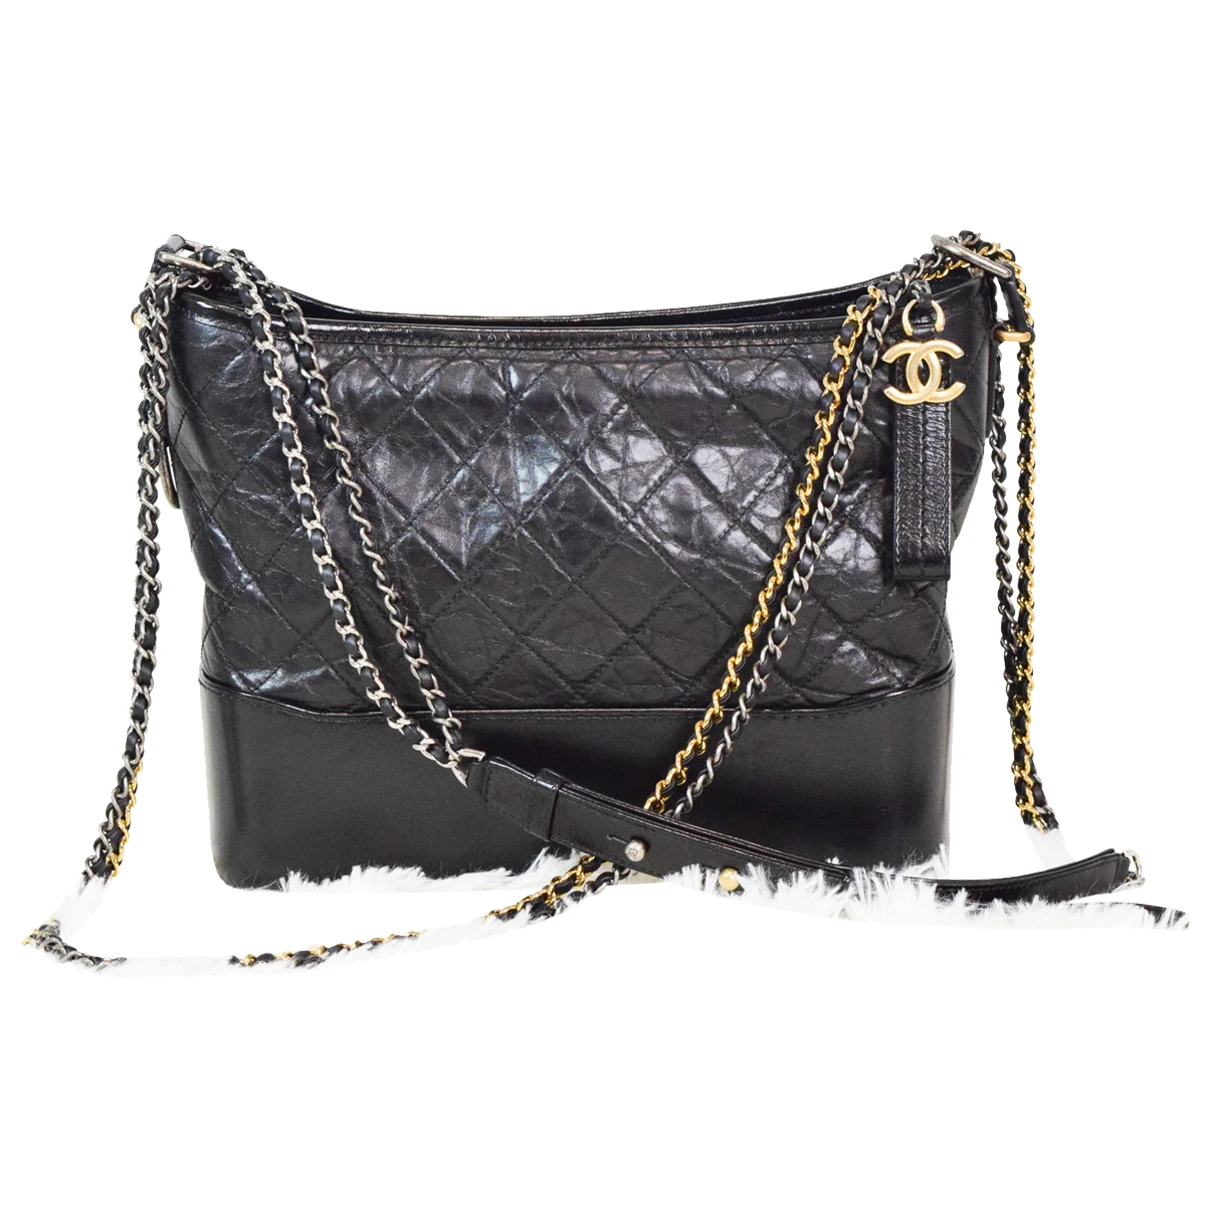 bags Chanel handbags Gabrielle for Female Leather. Used condition